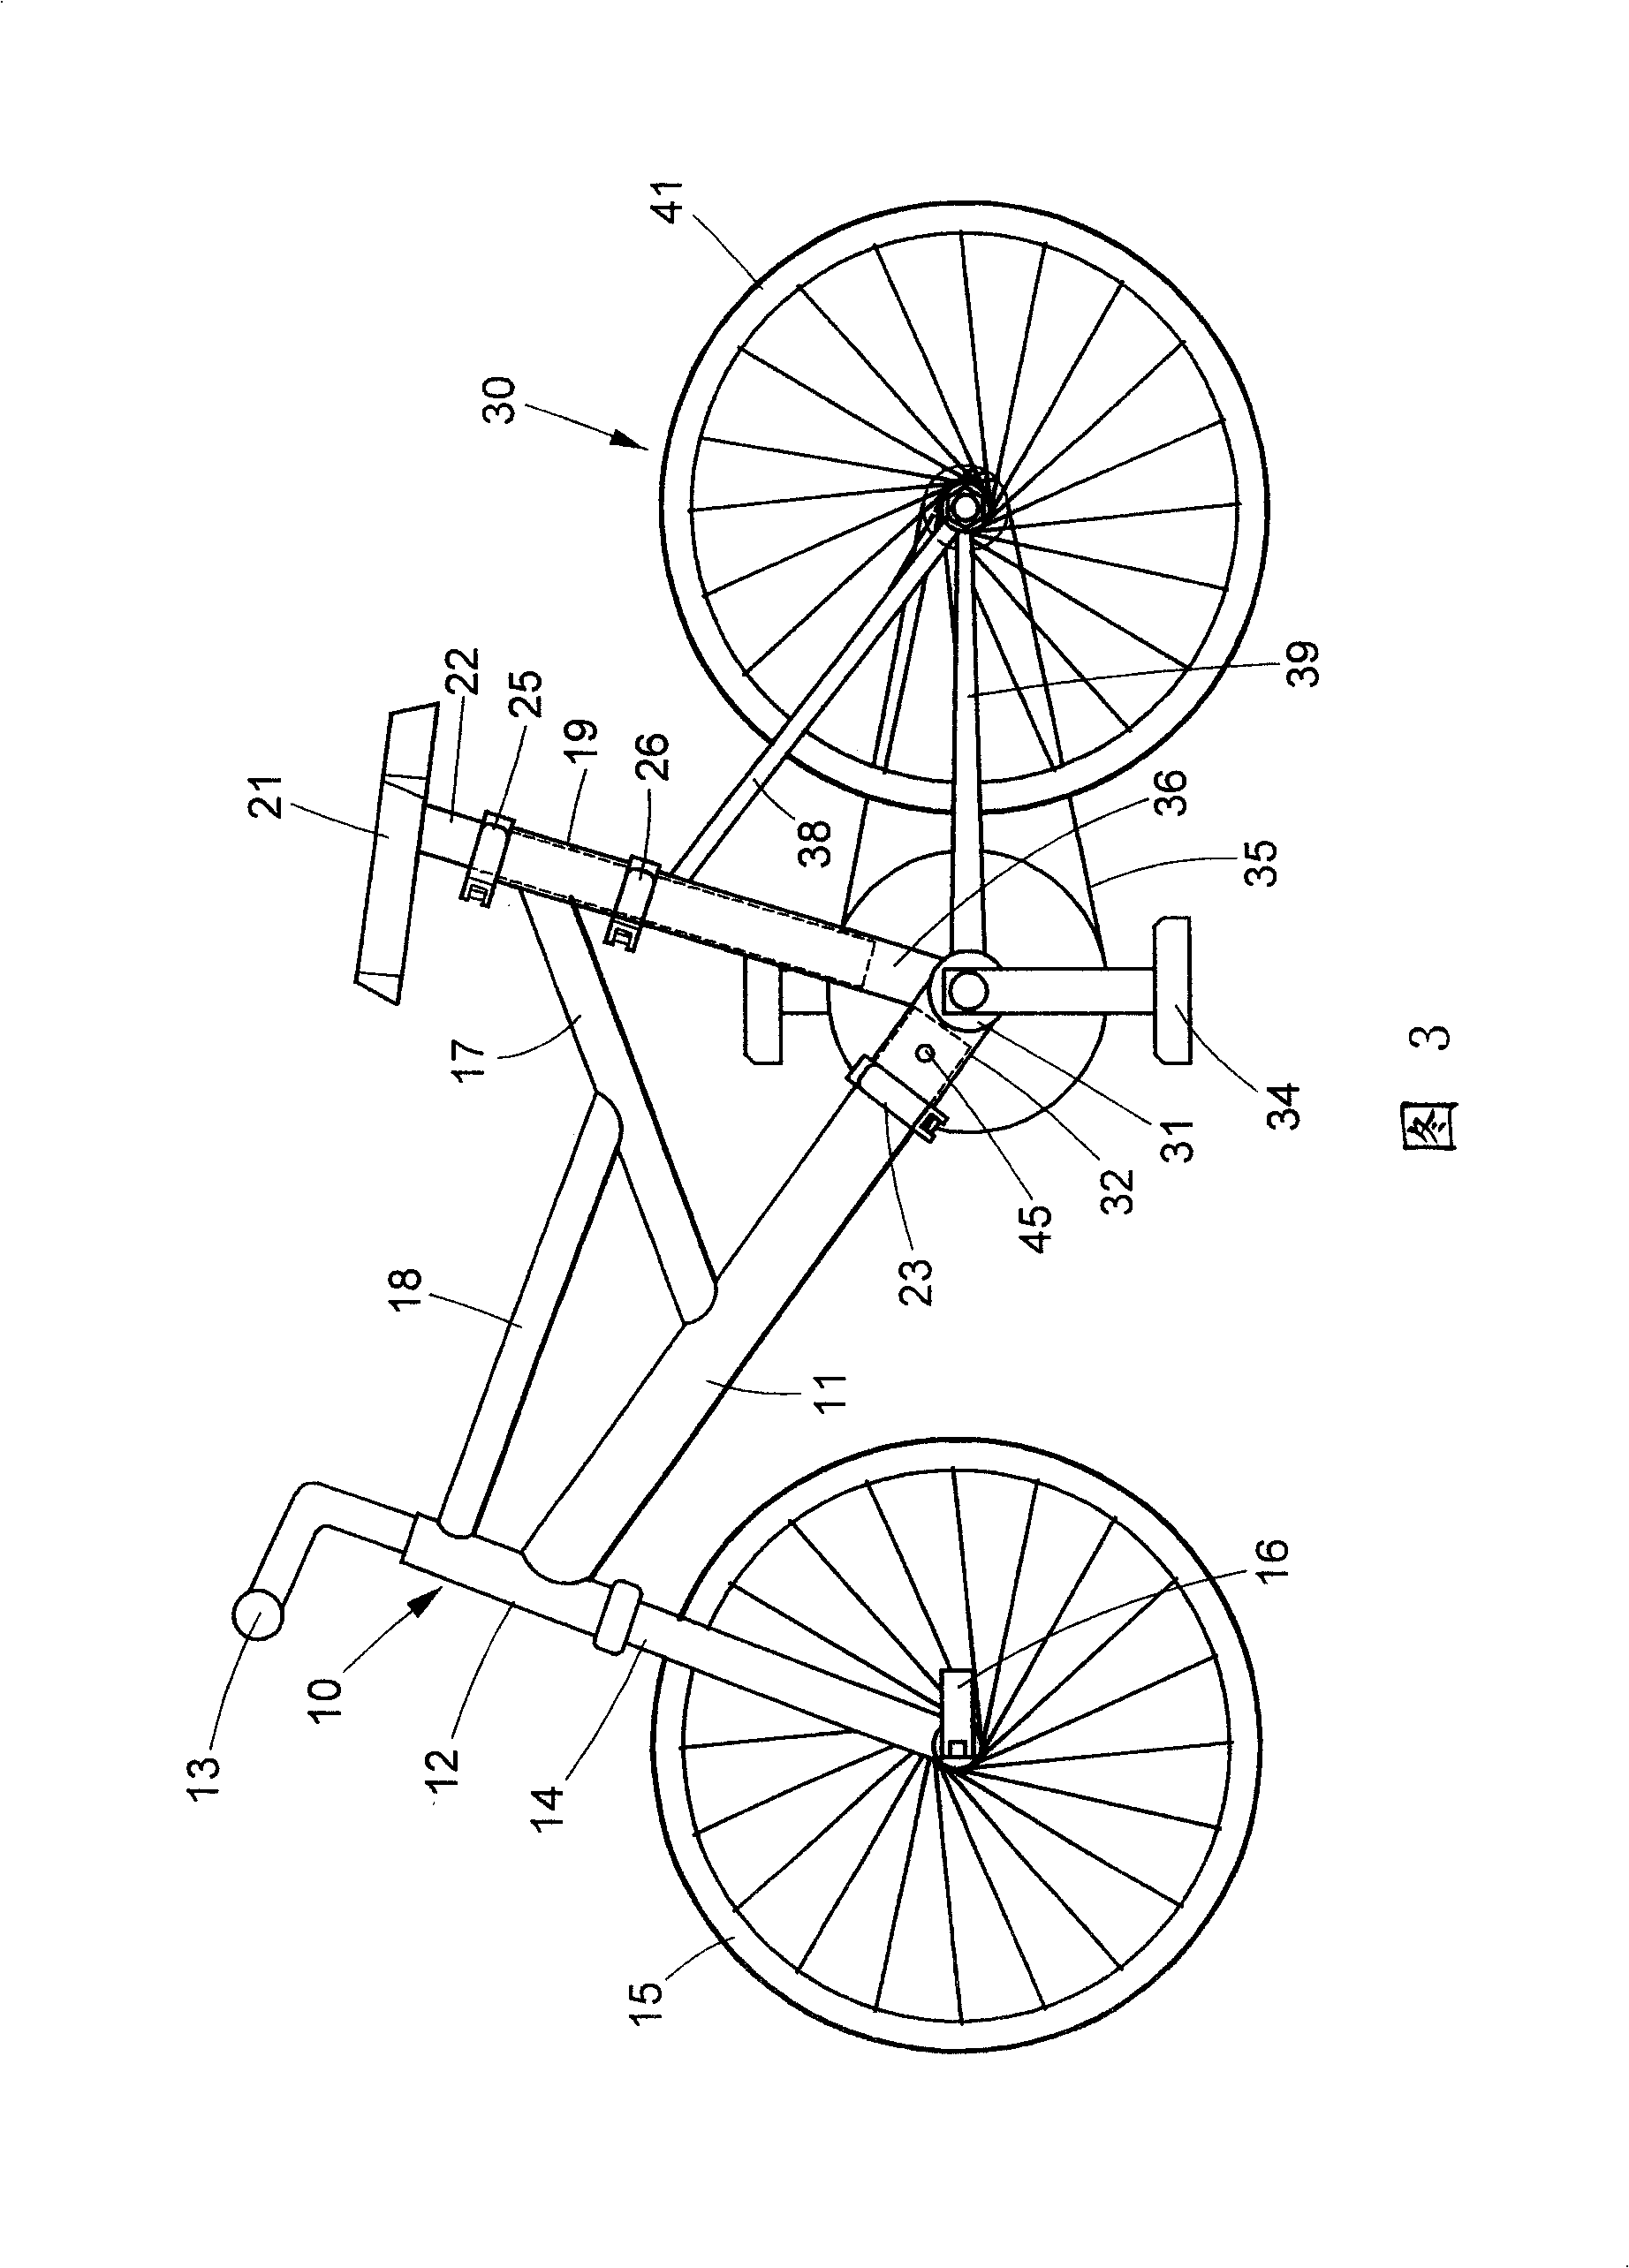 Bicycle combined according to different directions of stress